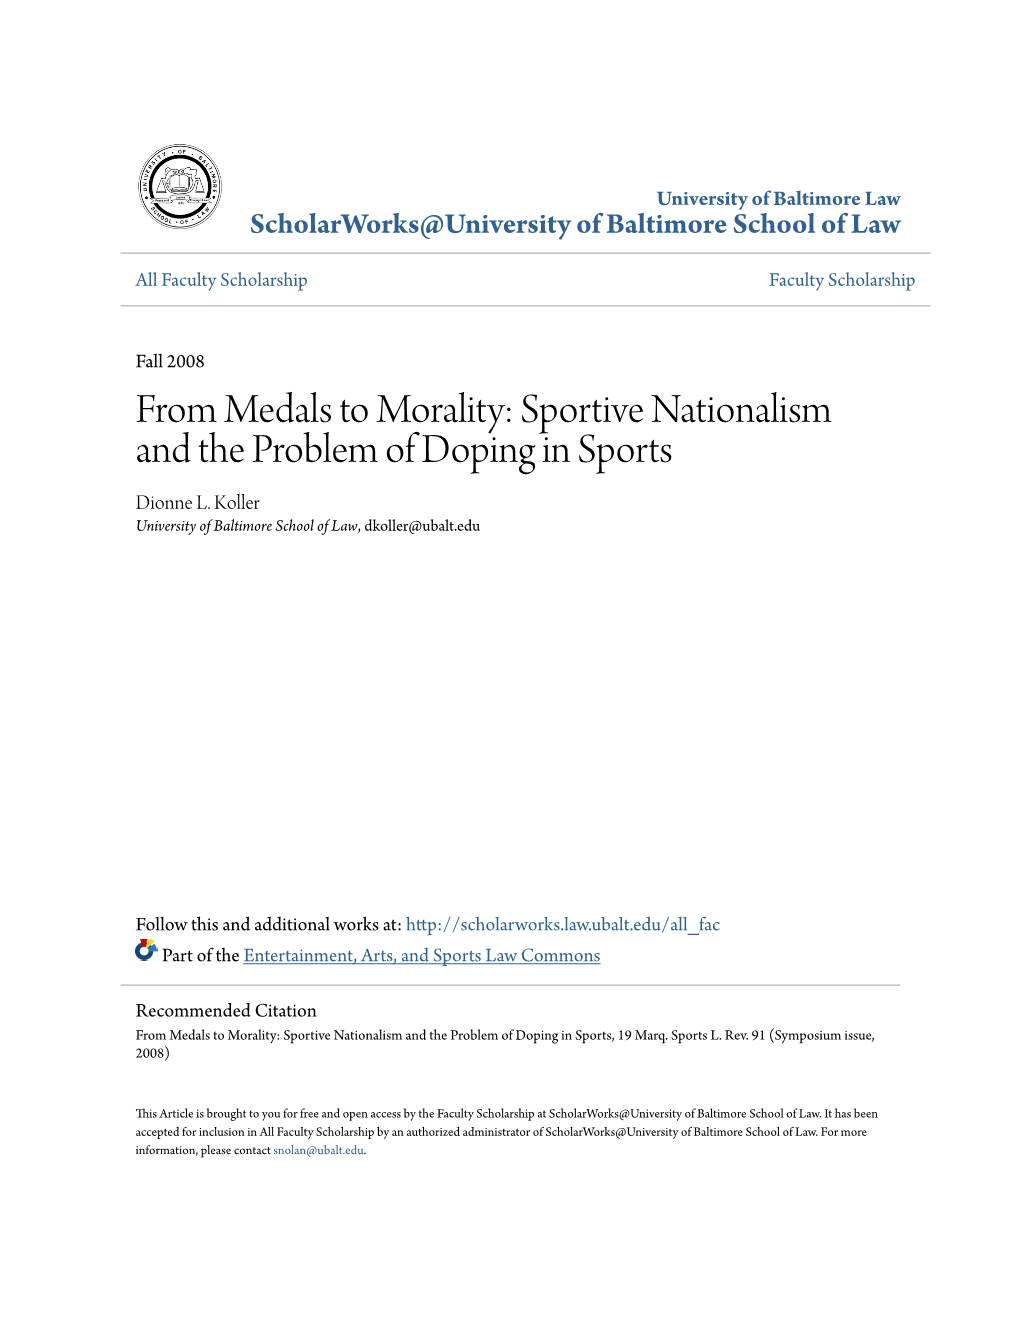 Sportive Nationalism and the Problem of Doping in Sports Dionne L